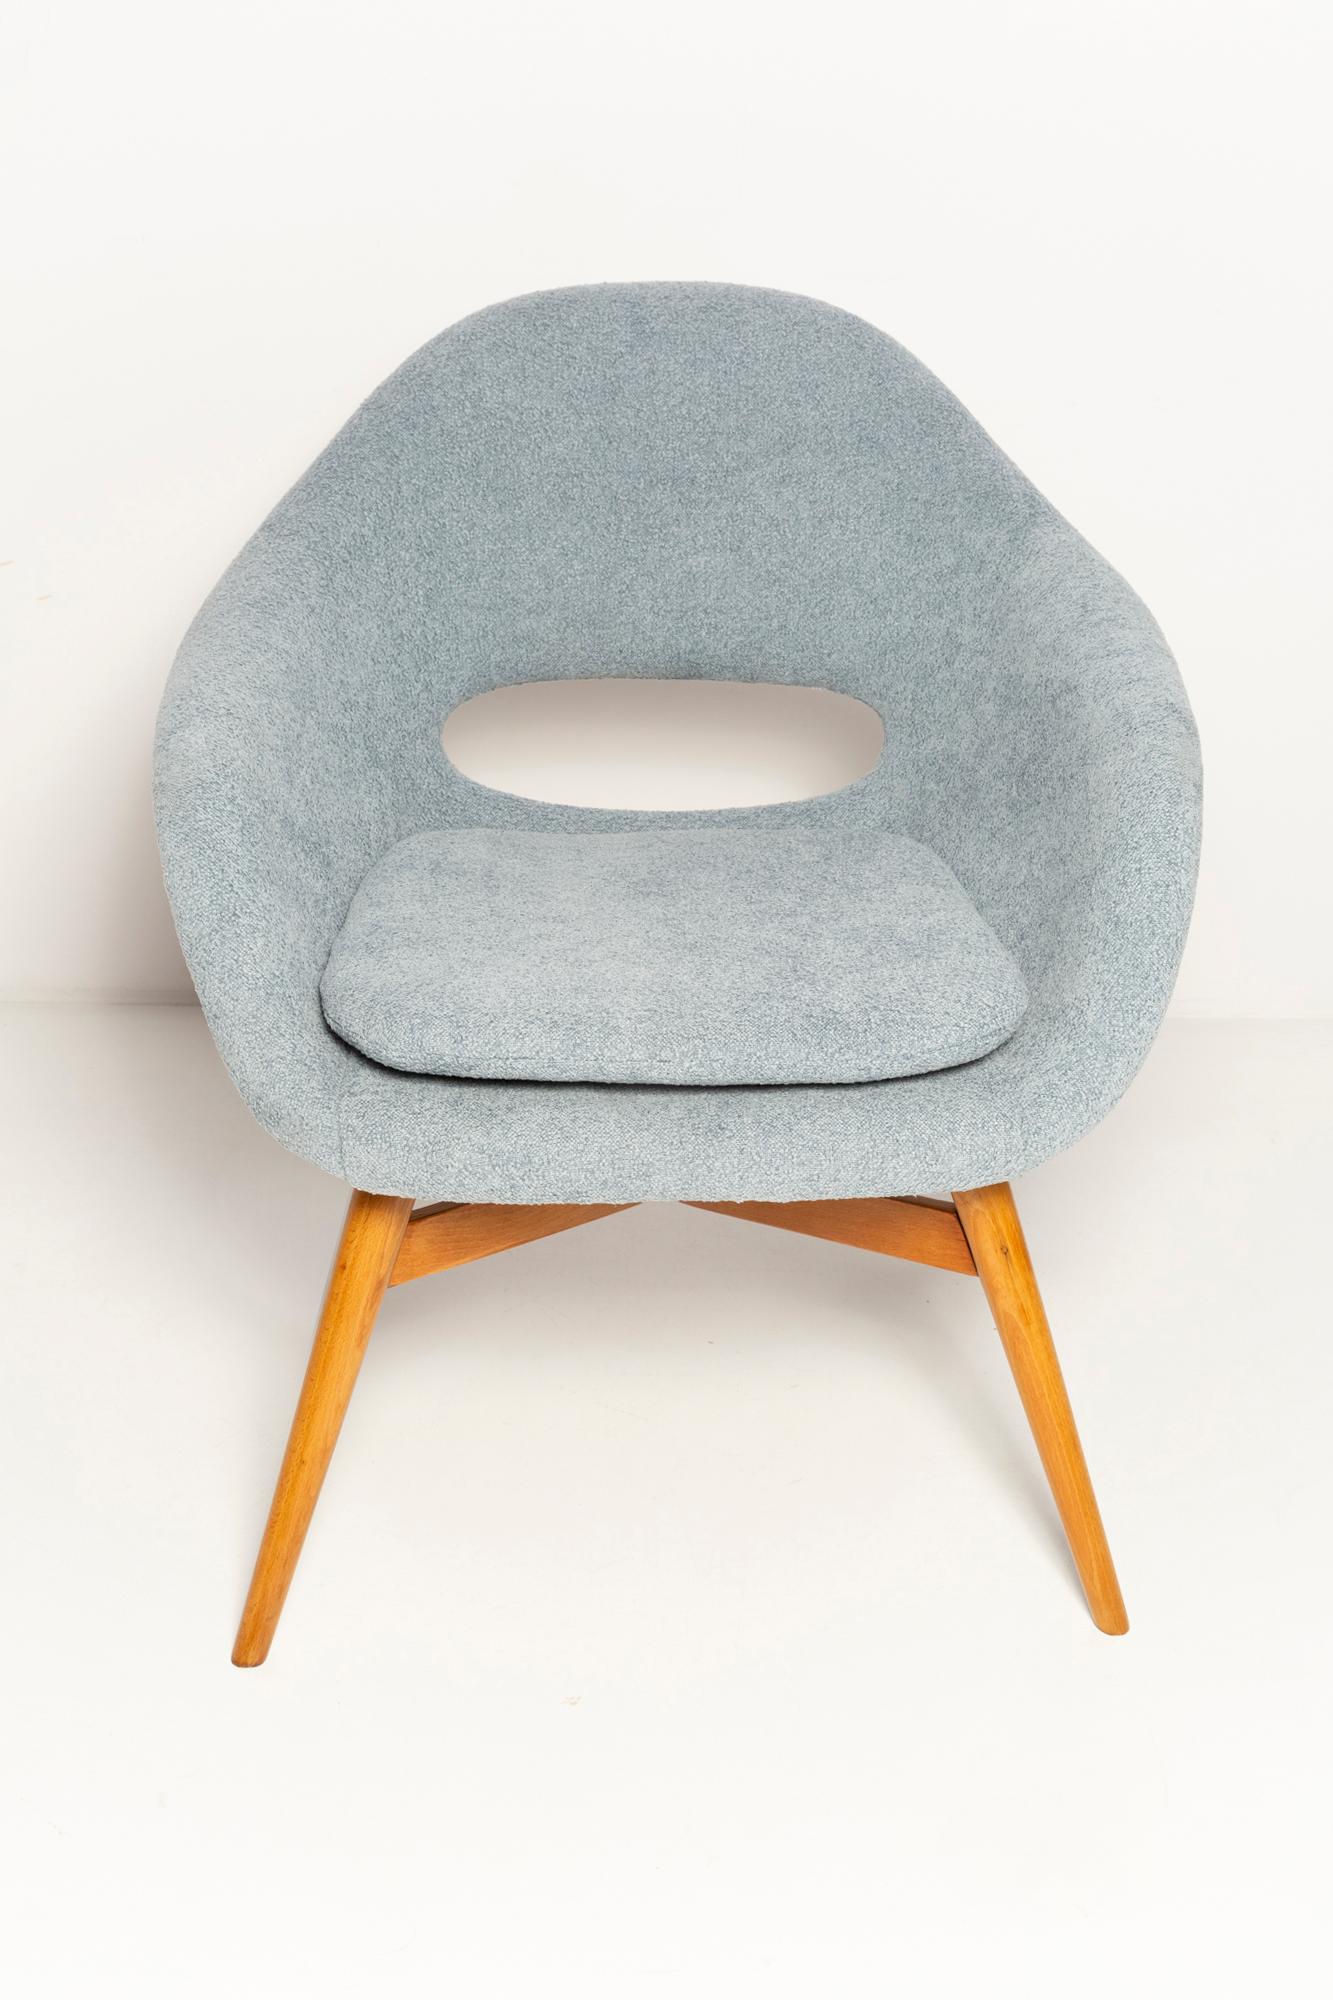 Set of Two Mid-Century Light Blue Shell Chairs, by Navratil, Czechoslovakia 1960 For Sale 6